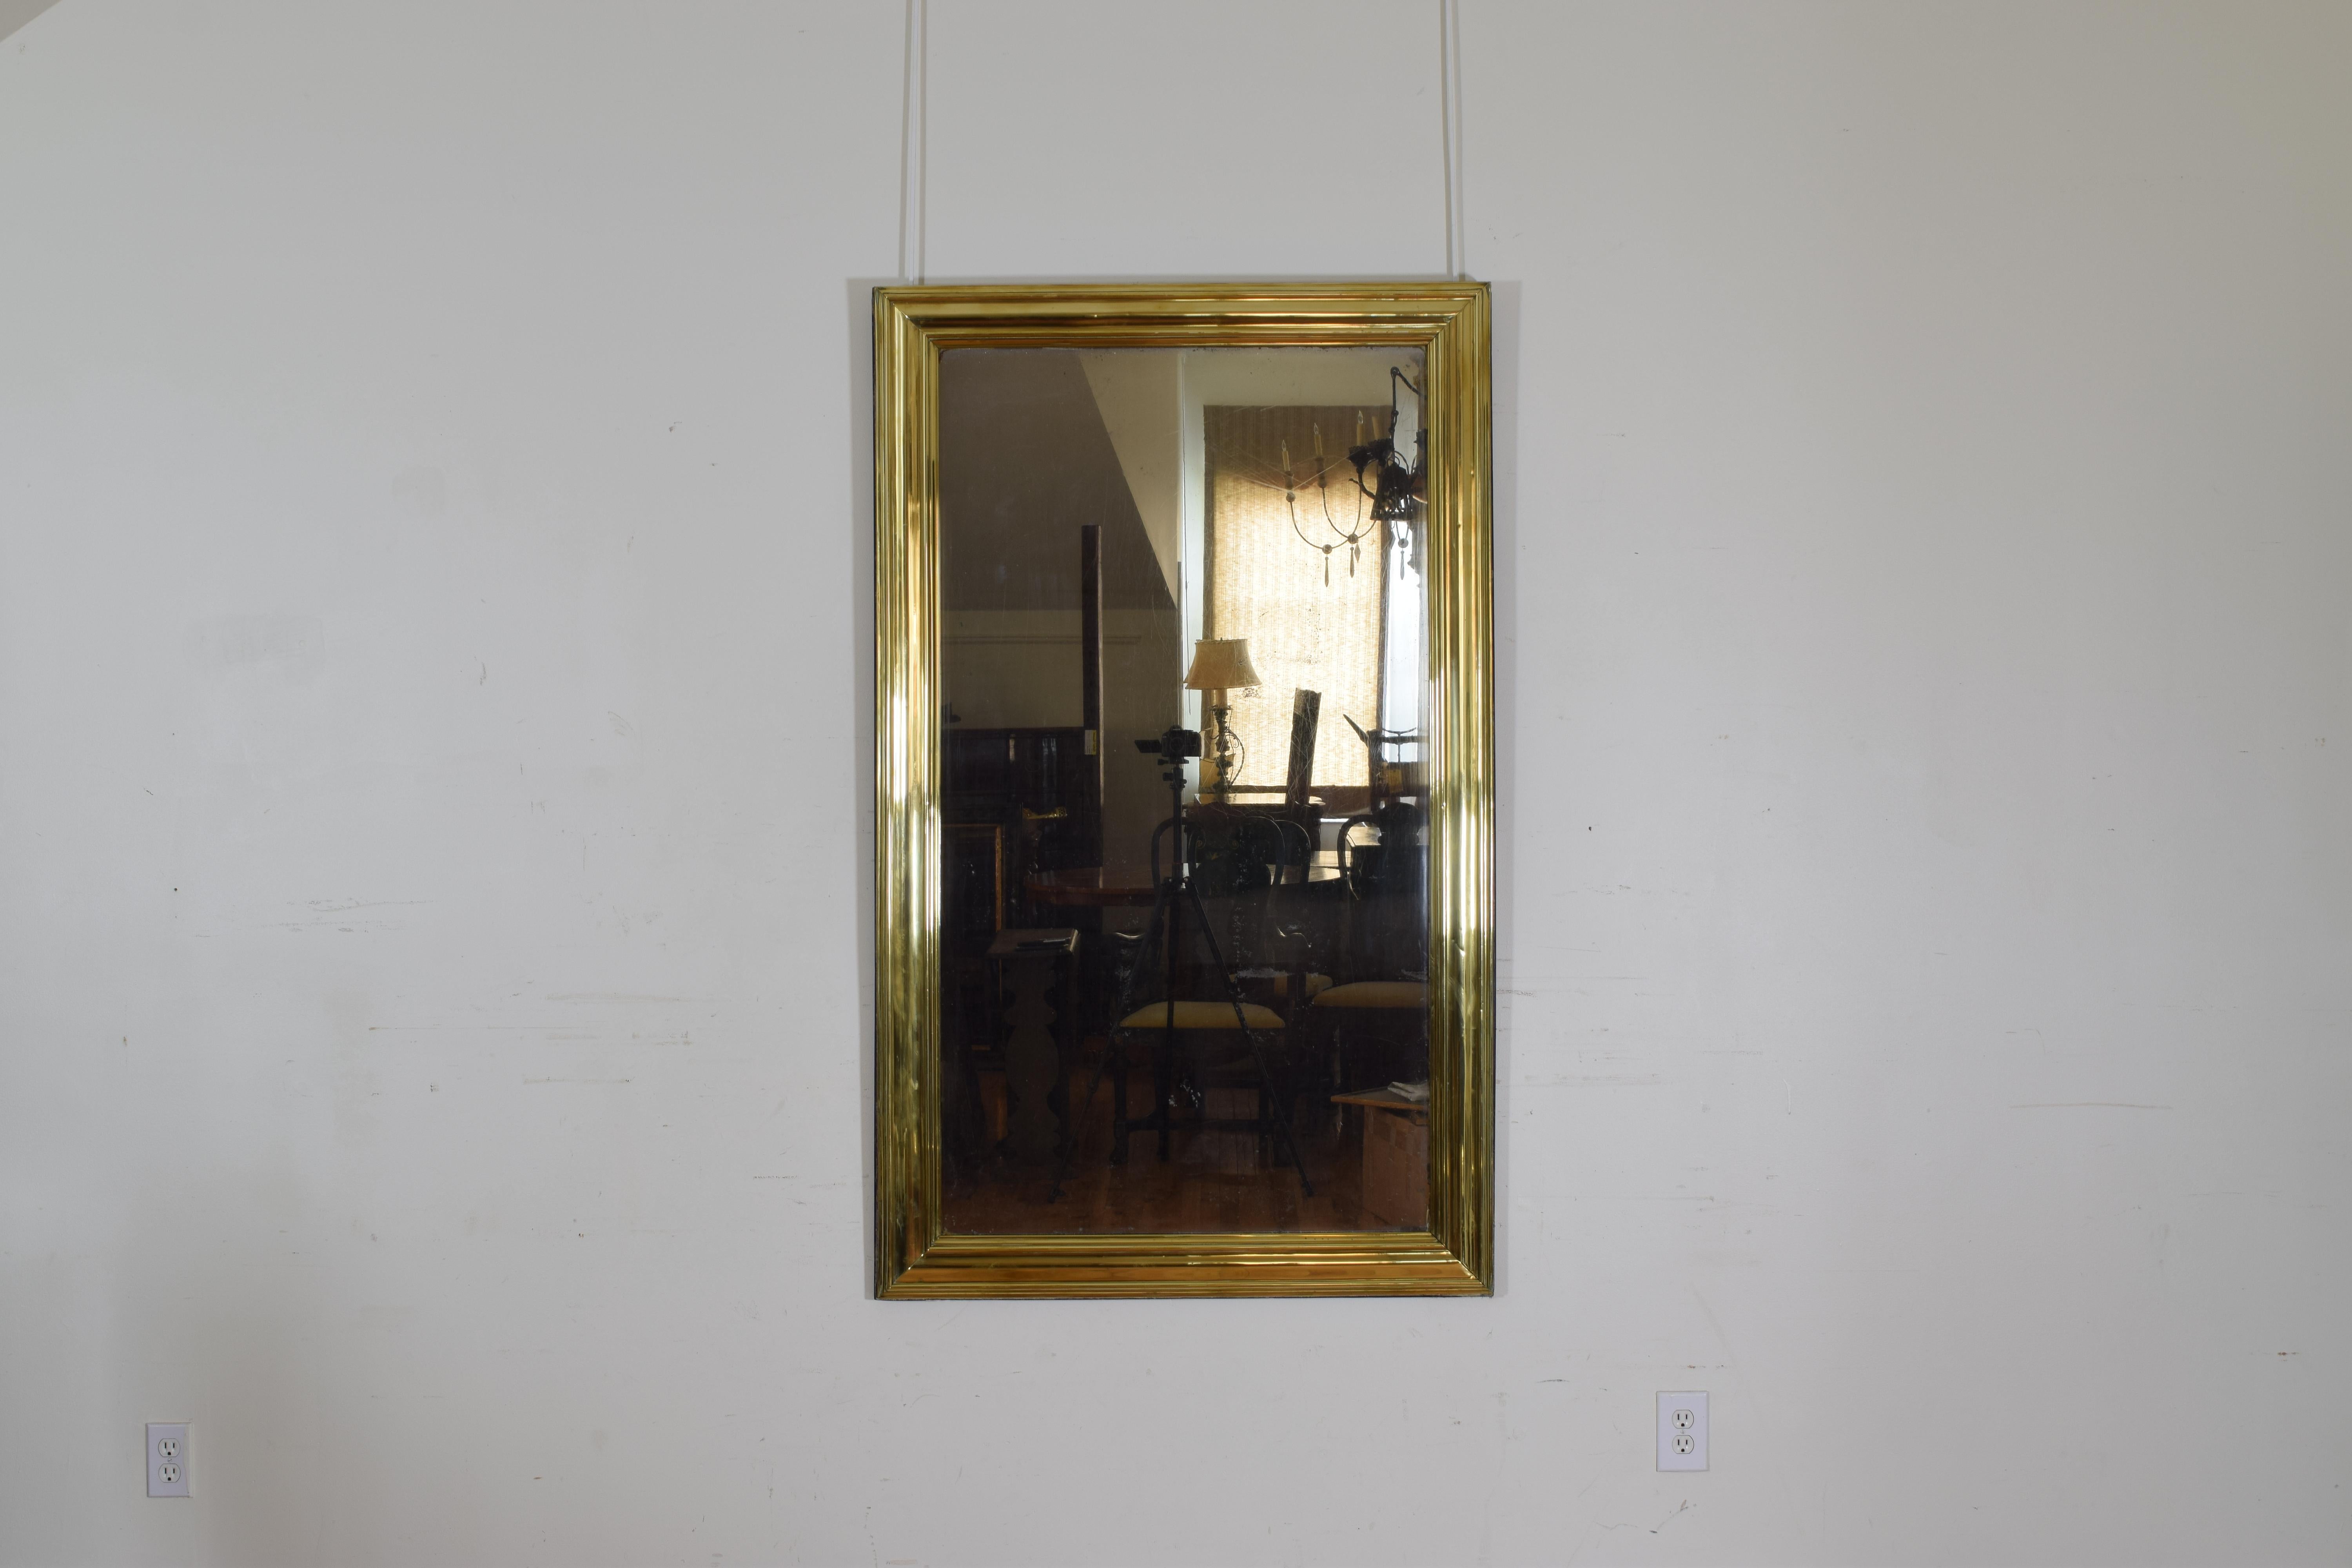 Shaped brass frame mounted atop a wooden backing, retaining antique mirrorplate.